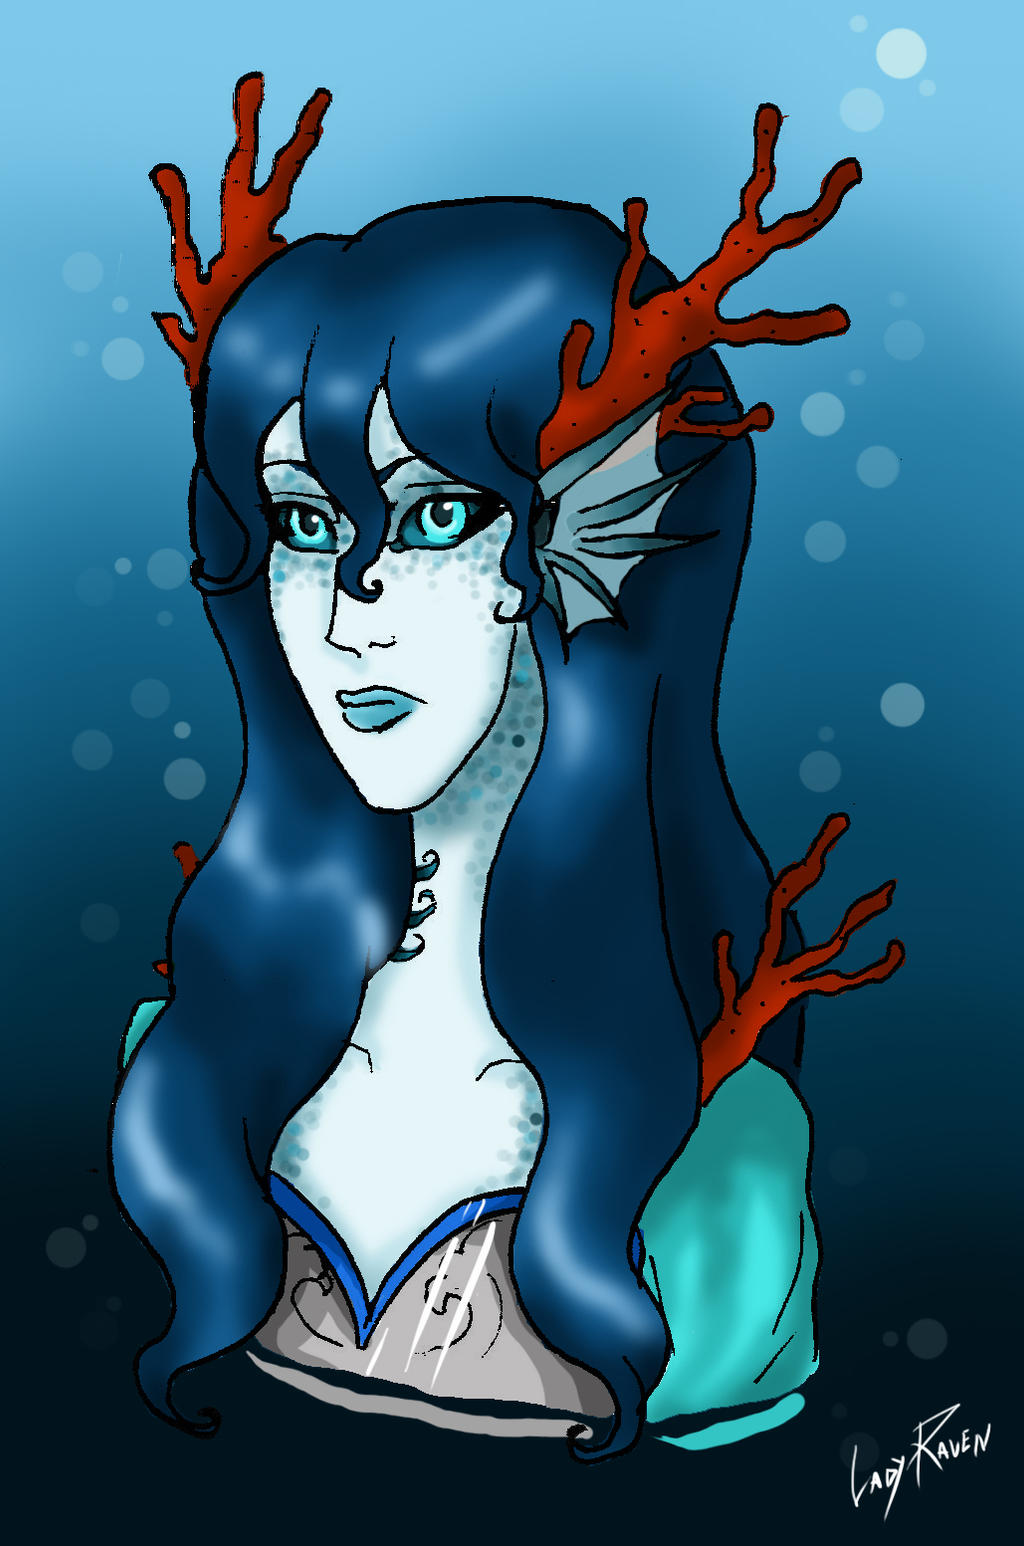 Belah, the oracle of the water